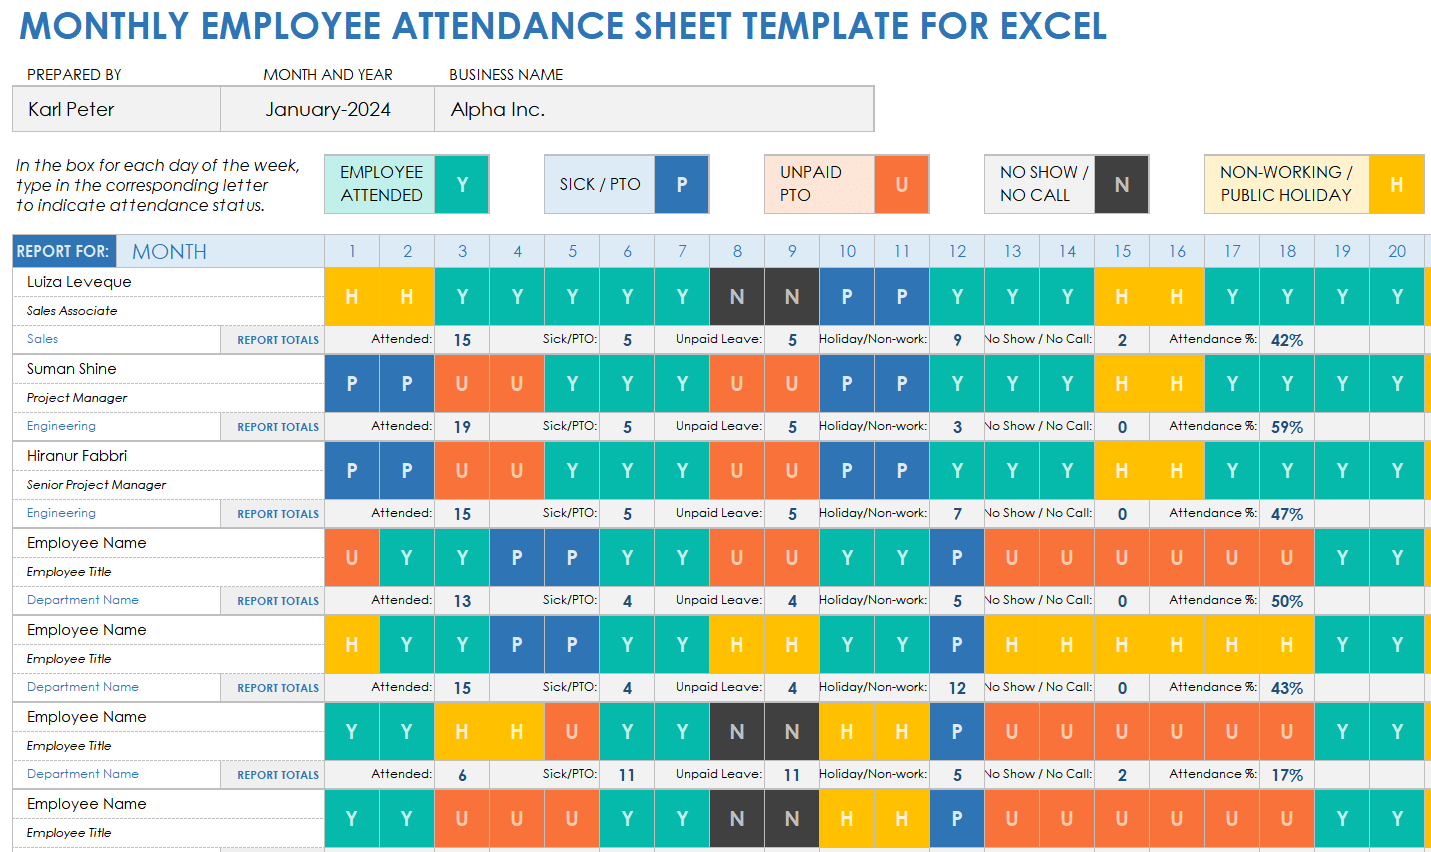 Monthly Employee Attendance Sheet Template for Excel